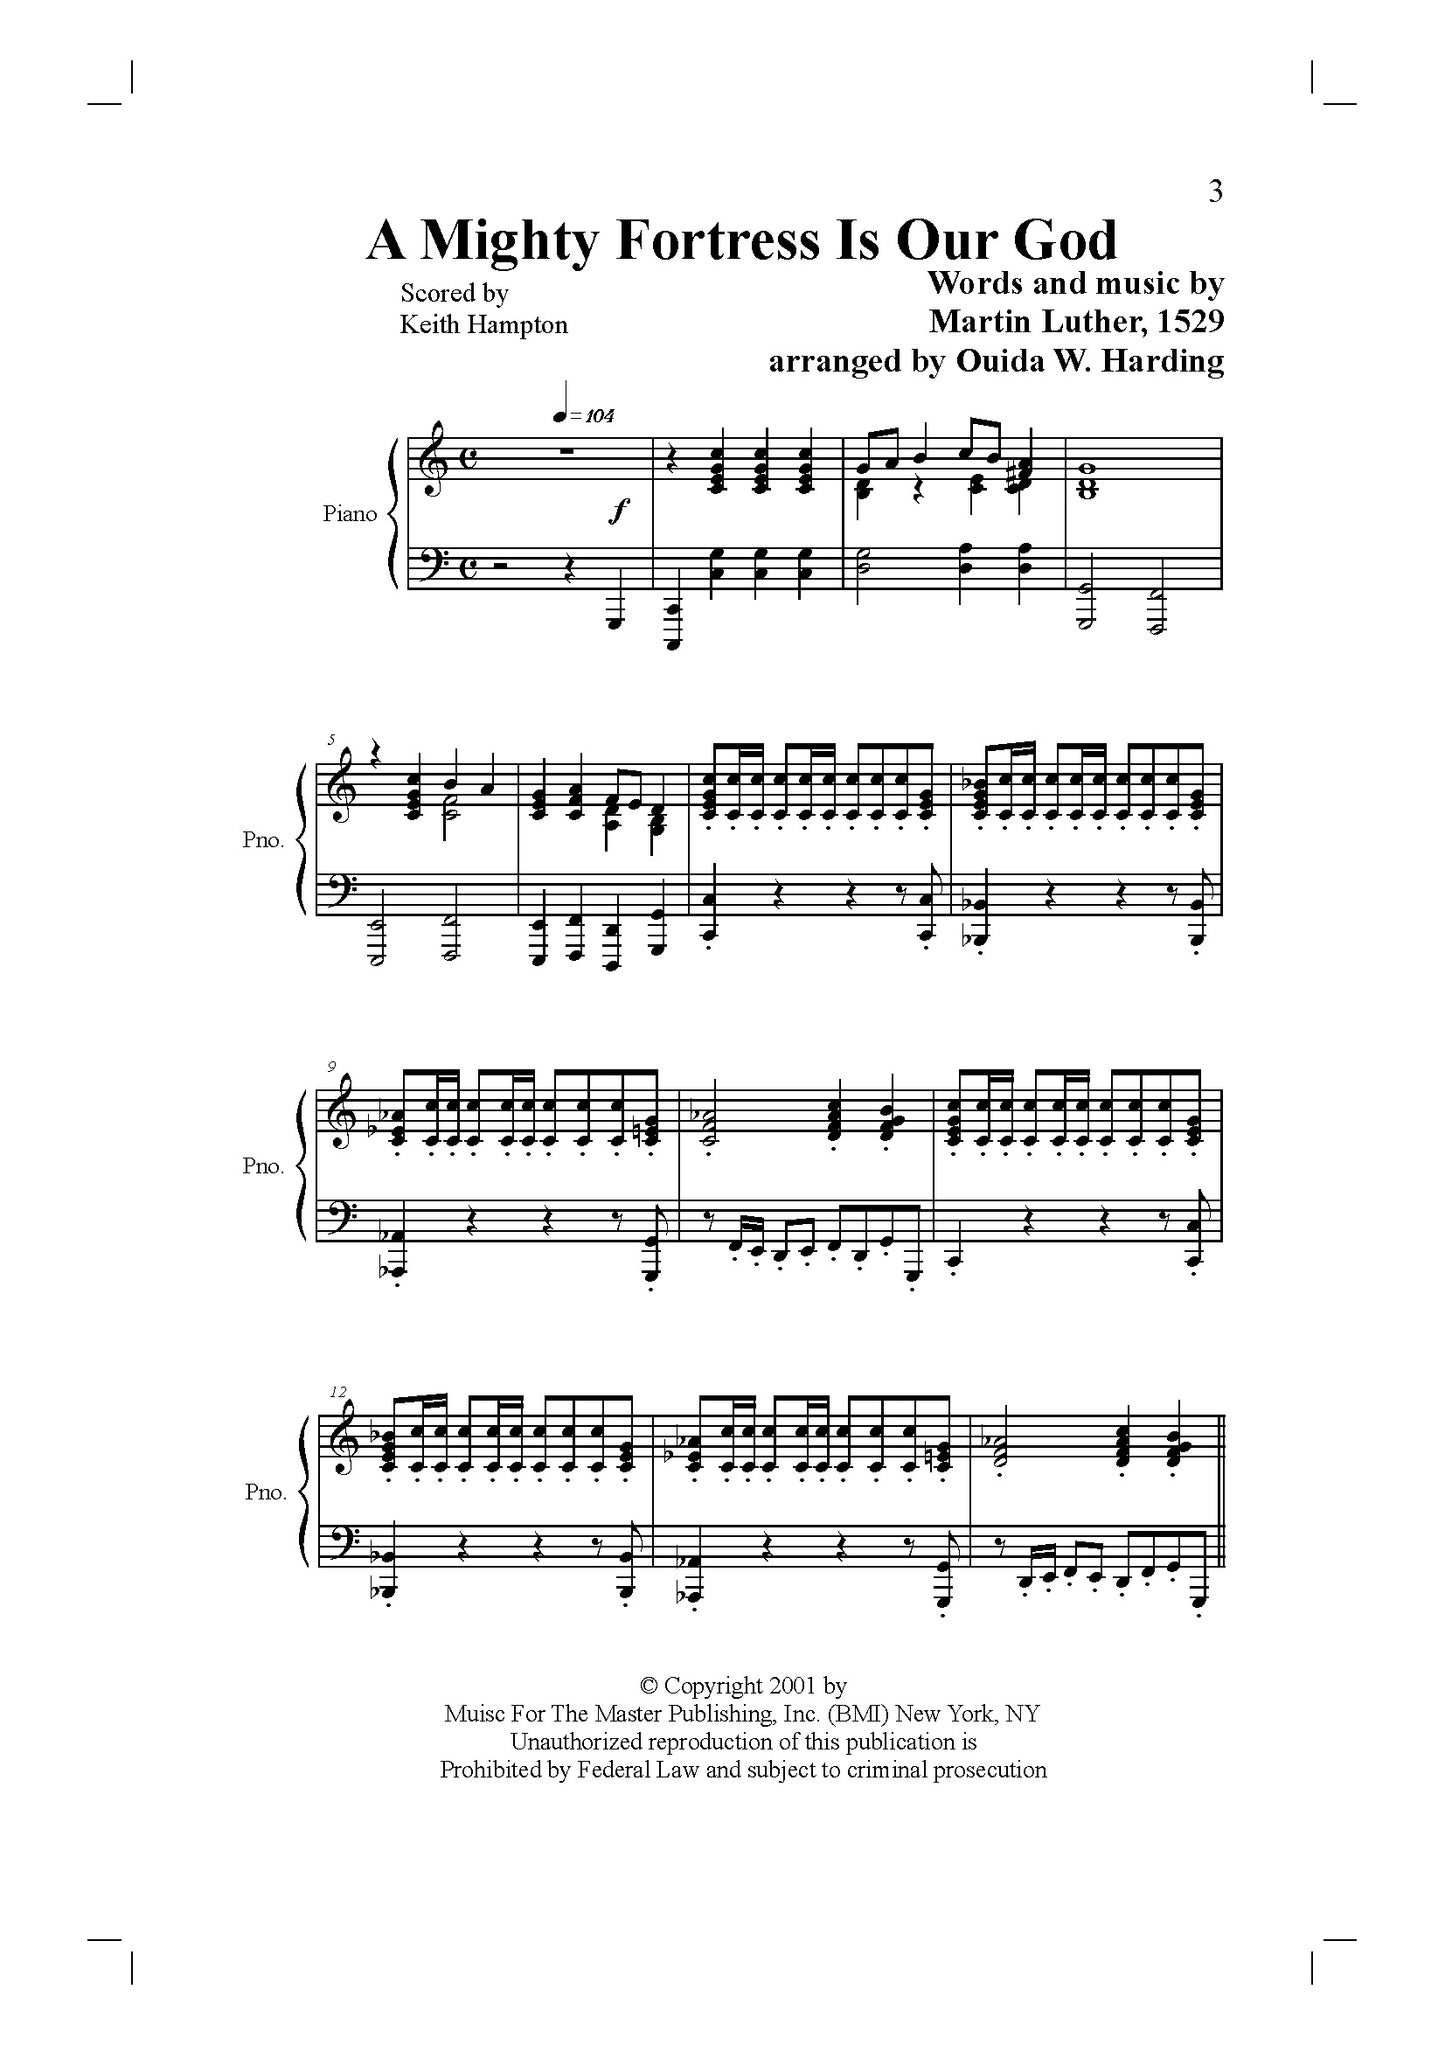 A Mighty Fortress By Rev. Ouida Harding (Sheet Music)